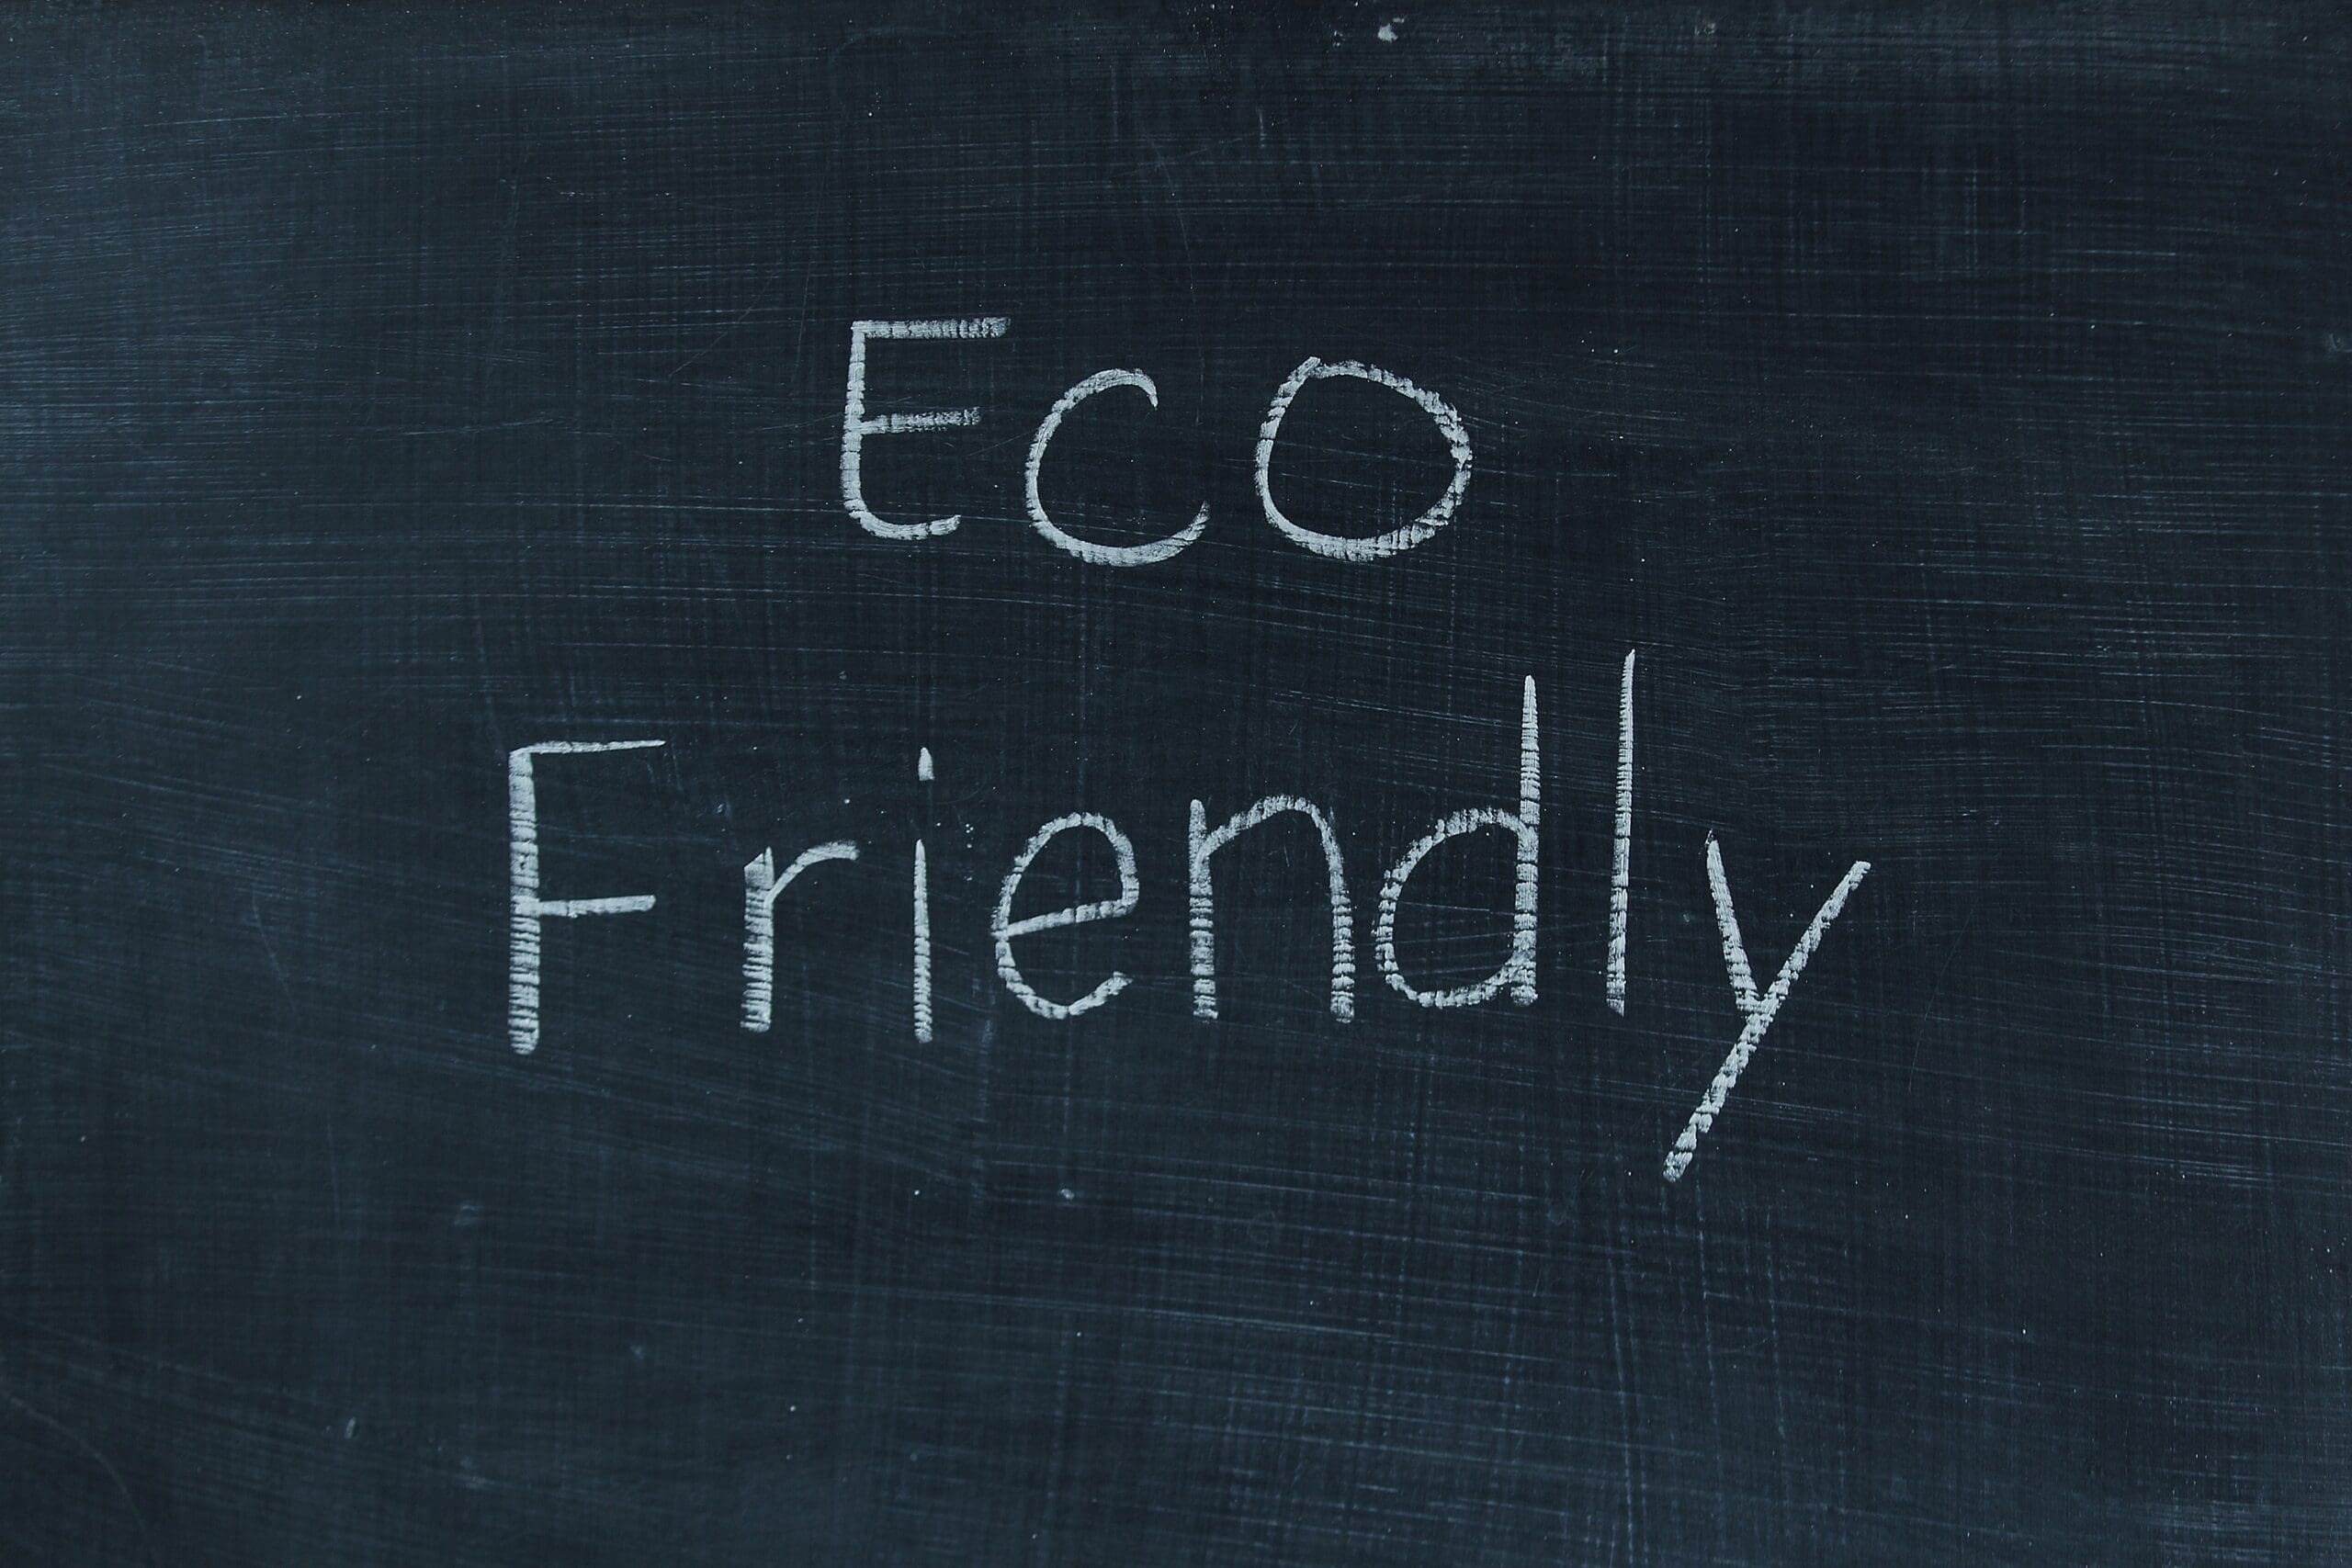 Eco-Friendly Cleaning Solutions for a Healthier Home